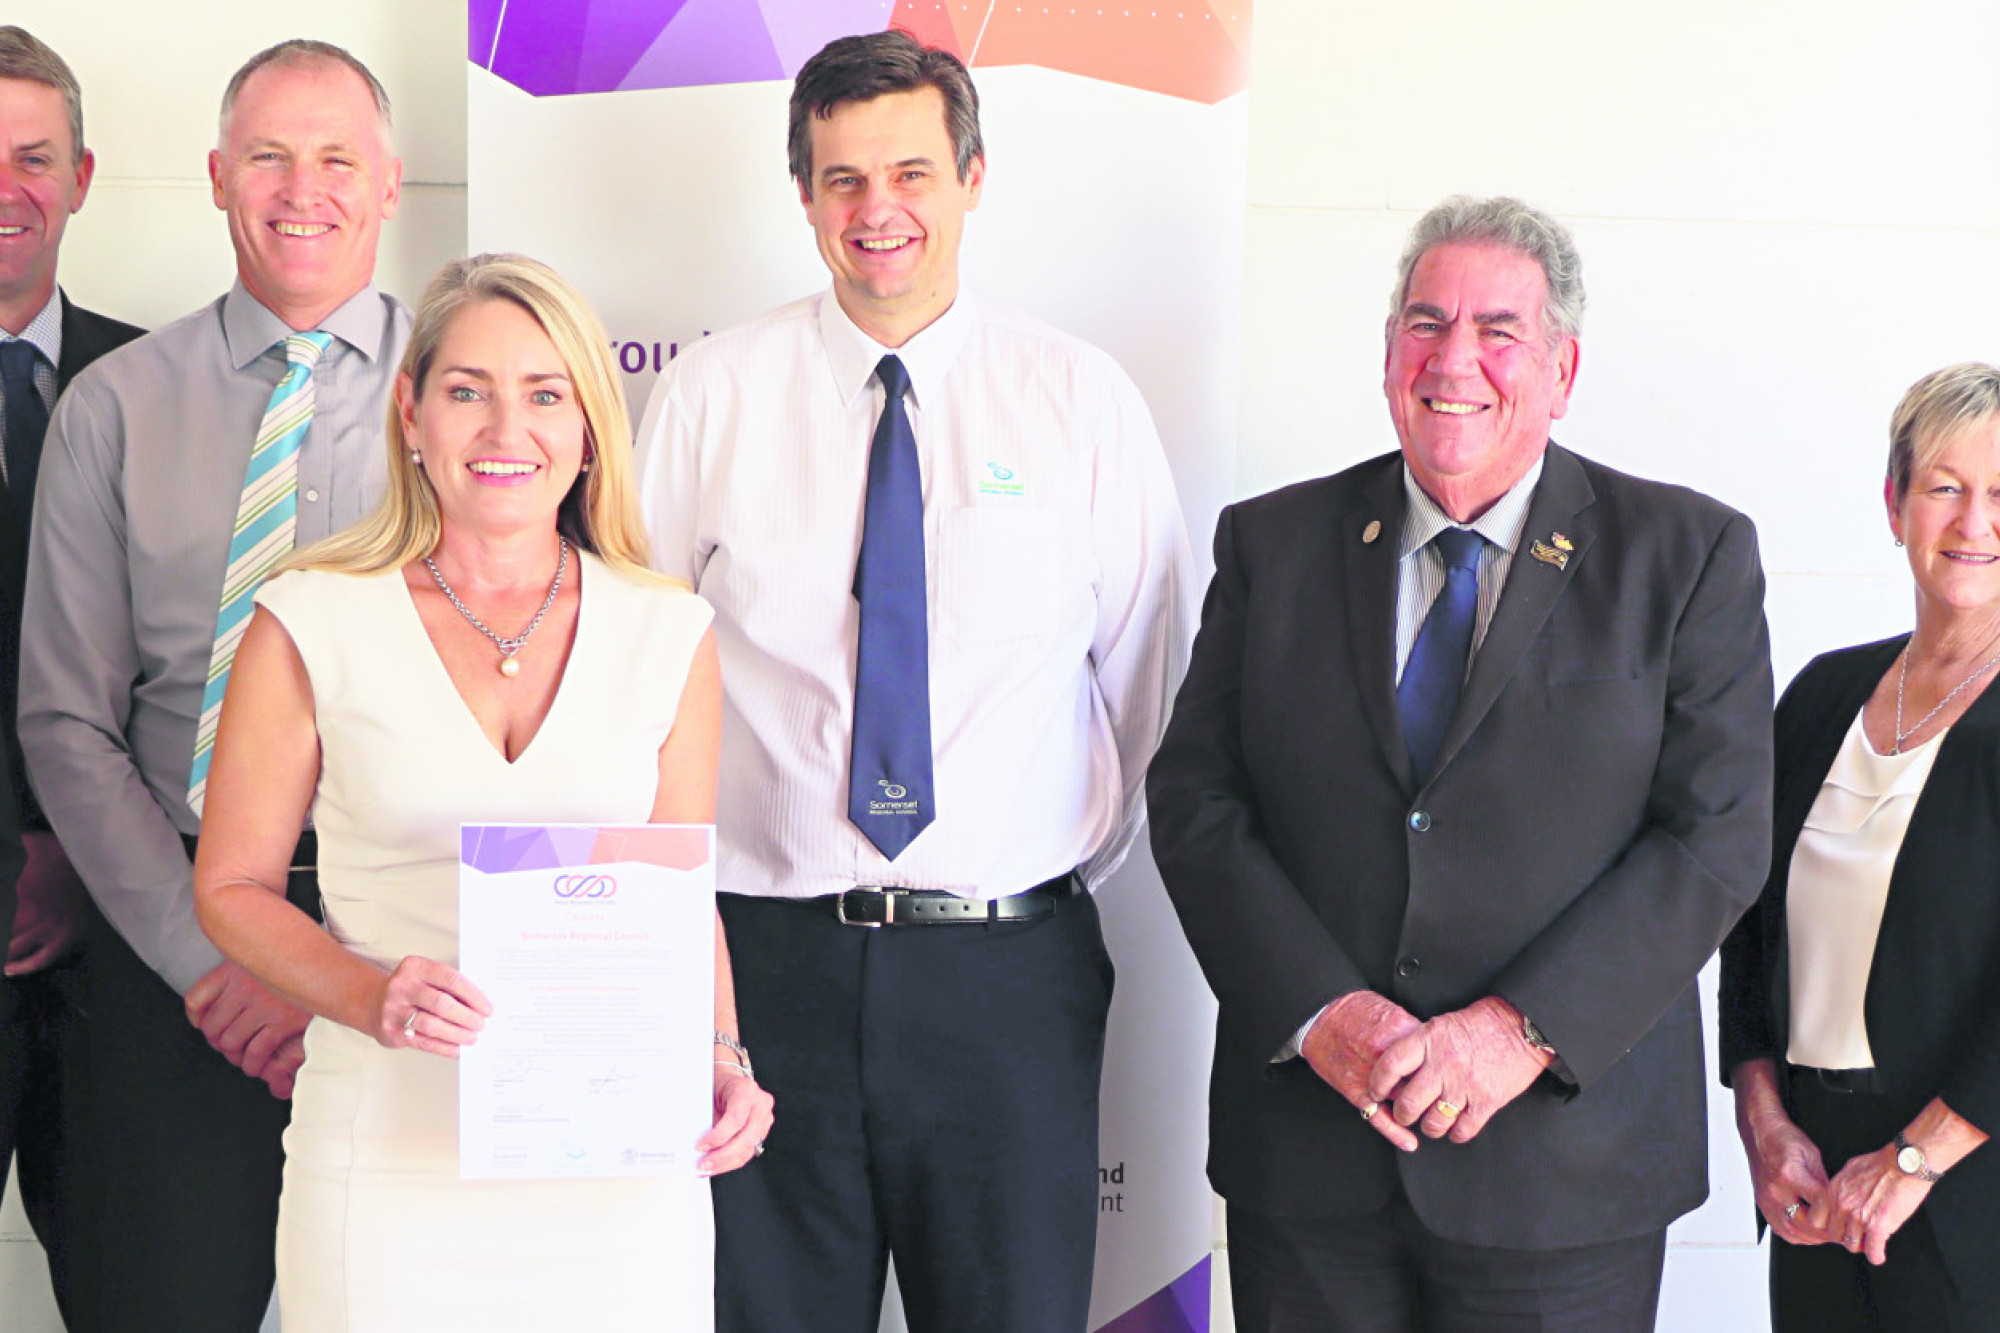 Somerset Regional Council signed the Small Business Friendly Charter. Pictured is Somerset councillors, CEO Andrew Johnson and Queensland Small Business Commissioner, Maree Adshead.